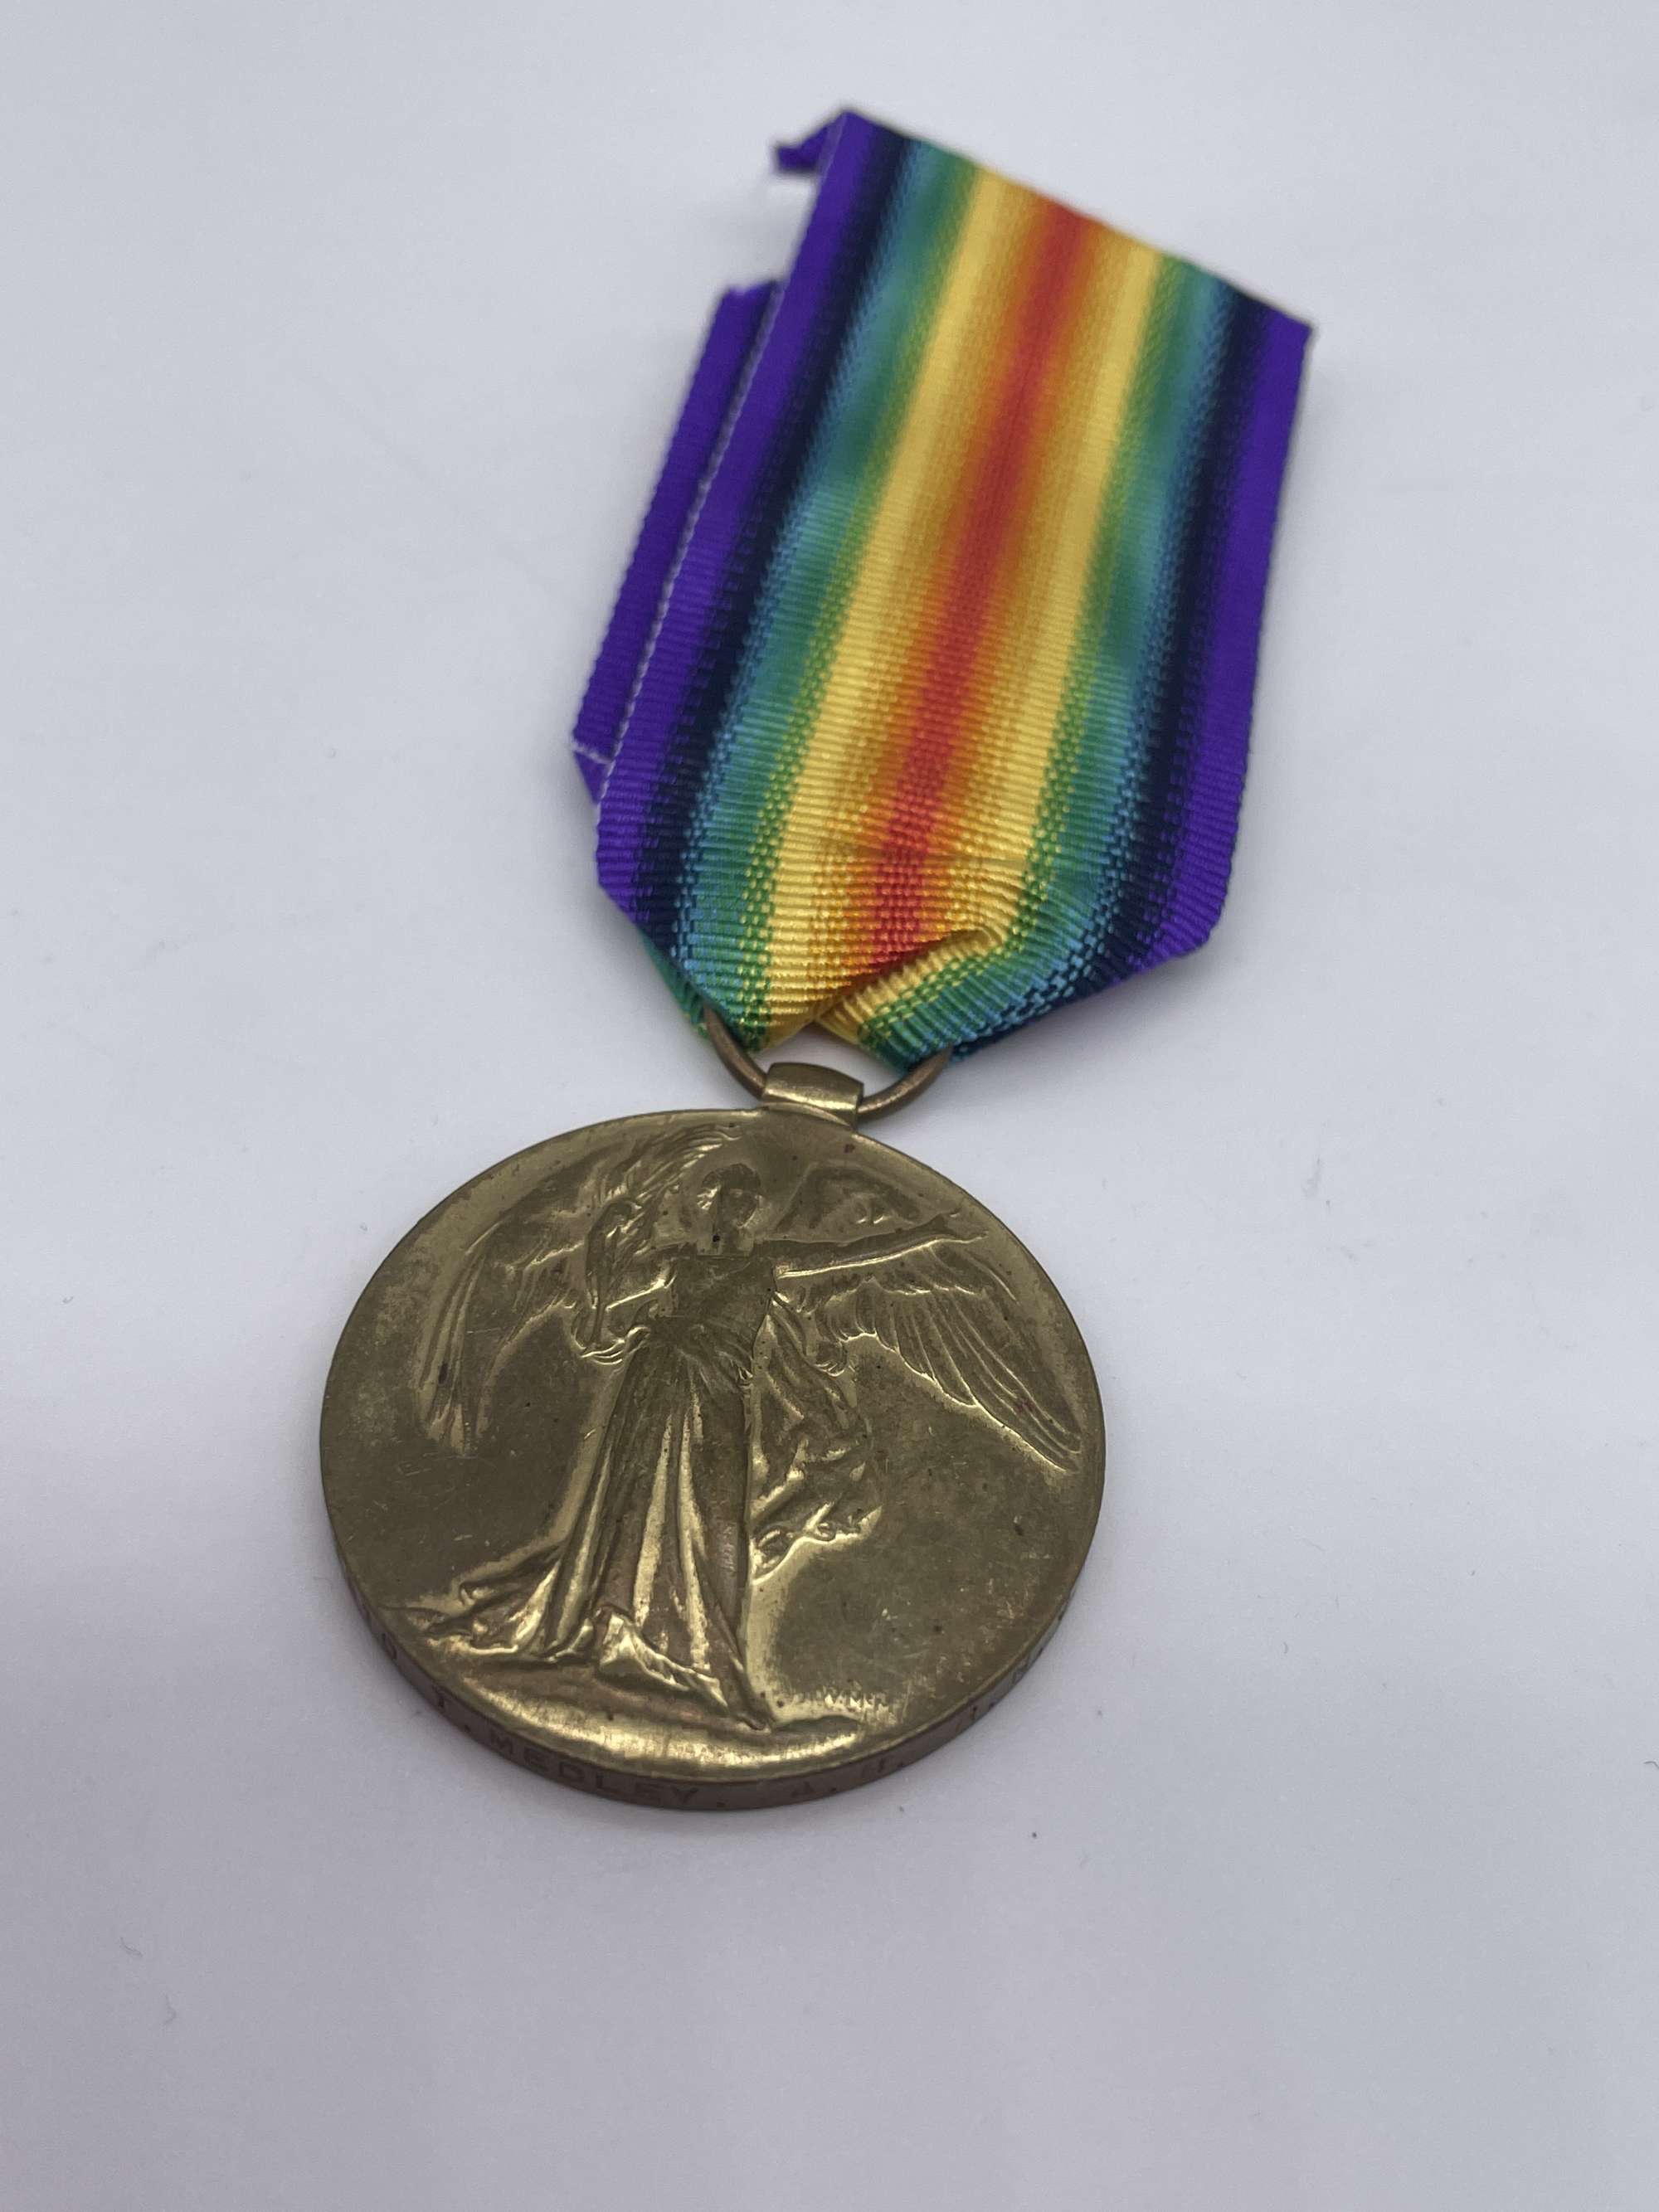 Original World War One Victory Medal, Medley, 2x Wounded and Killed in Action, Drake Bttn